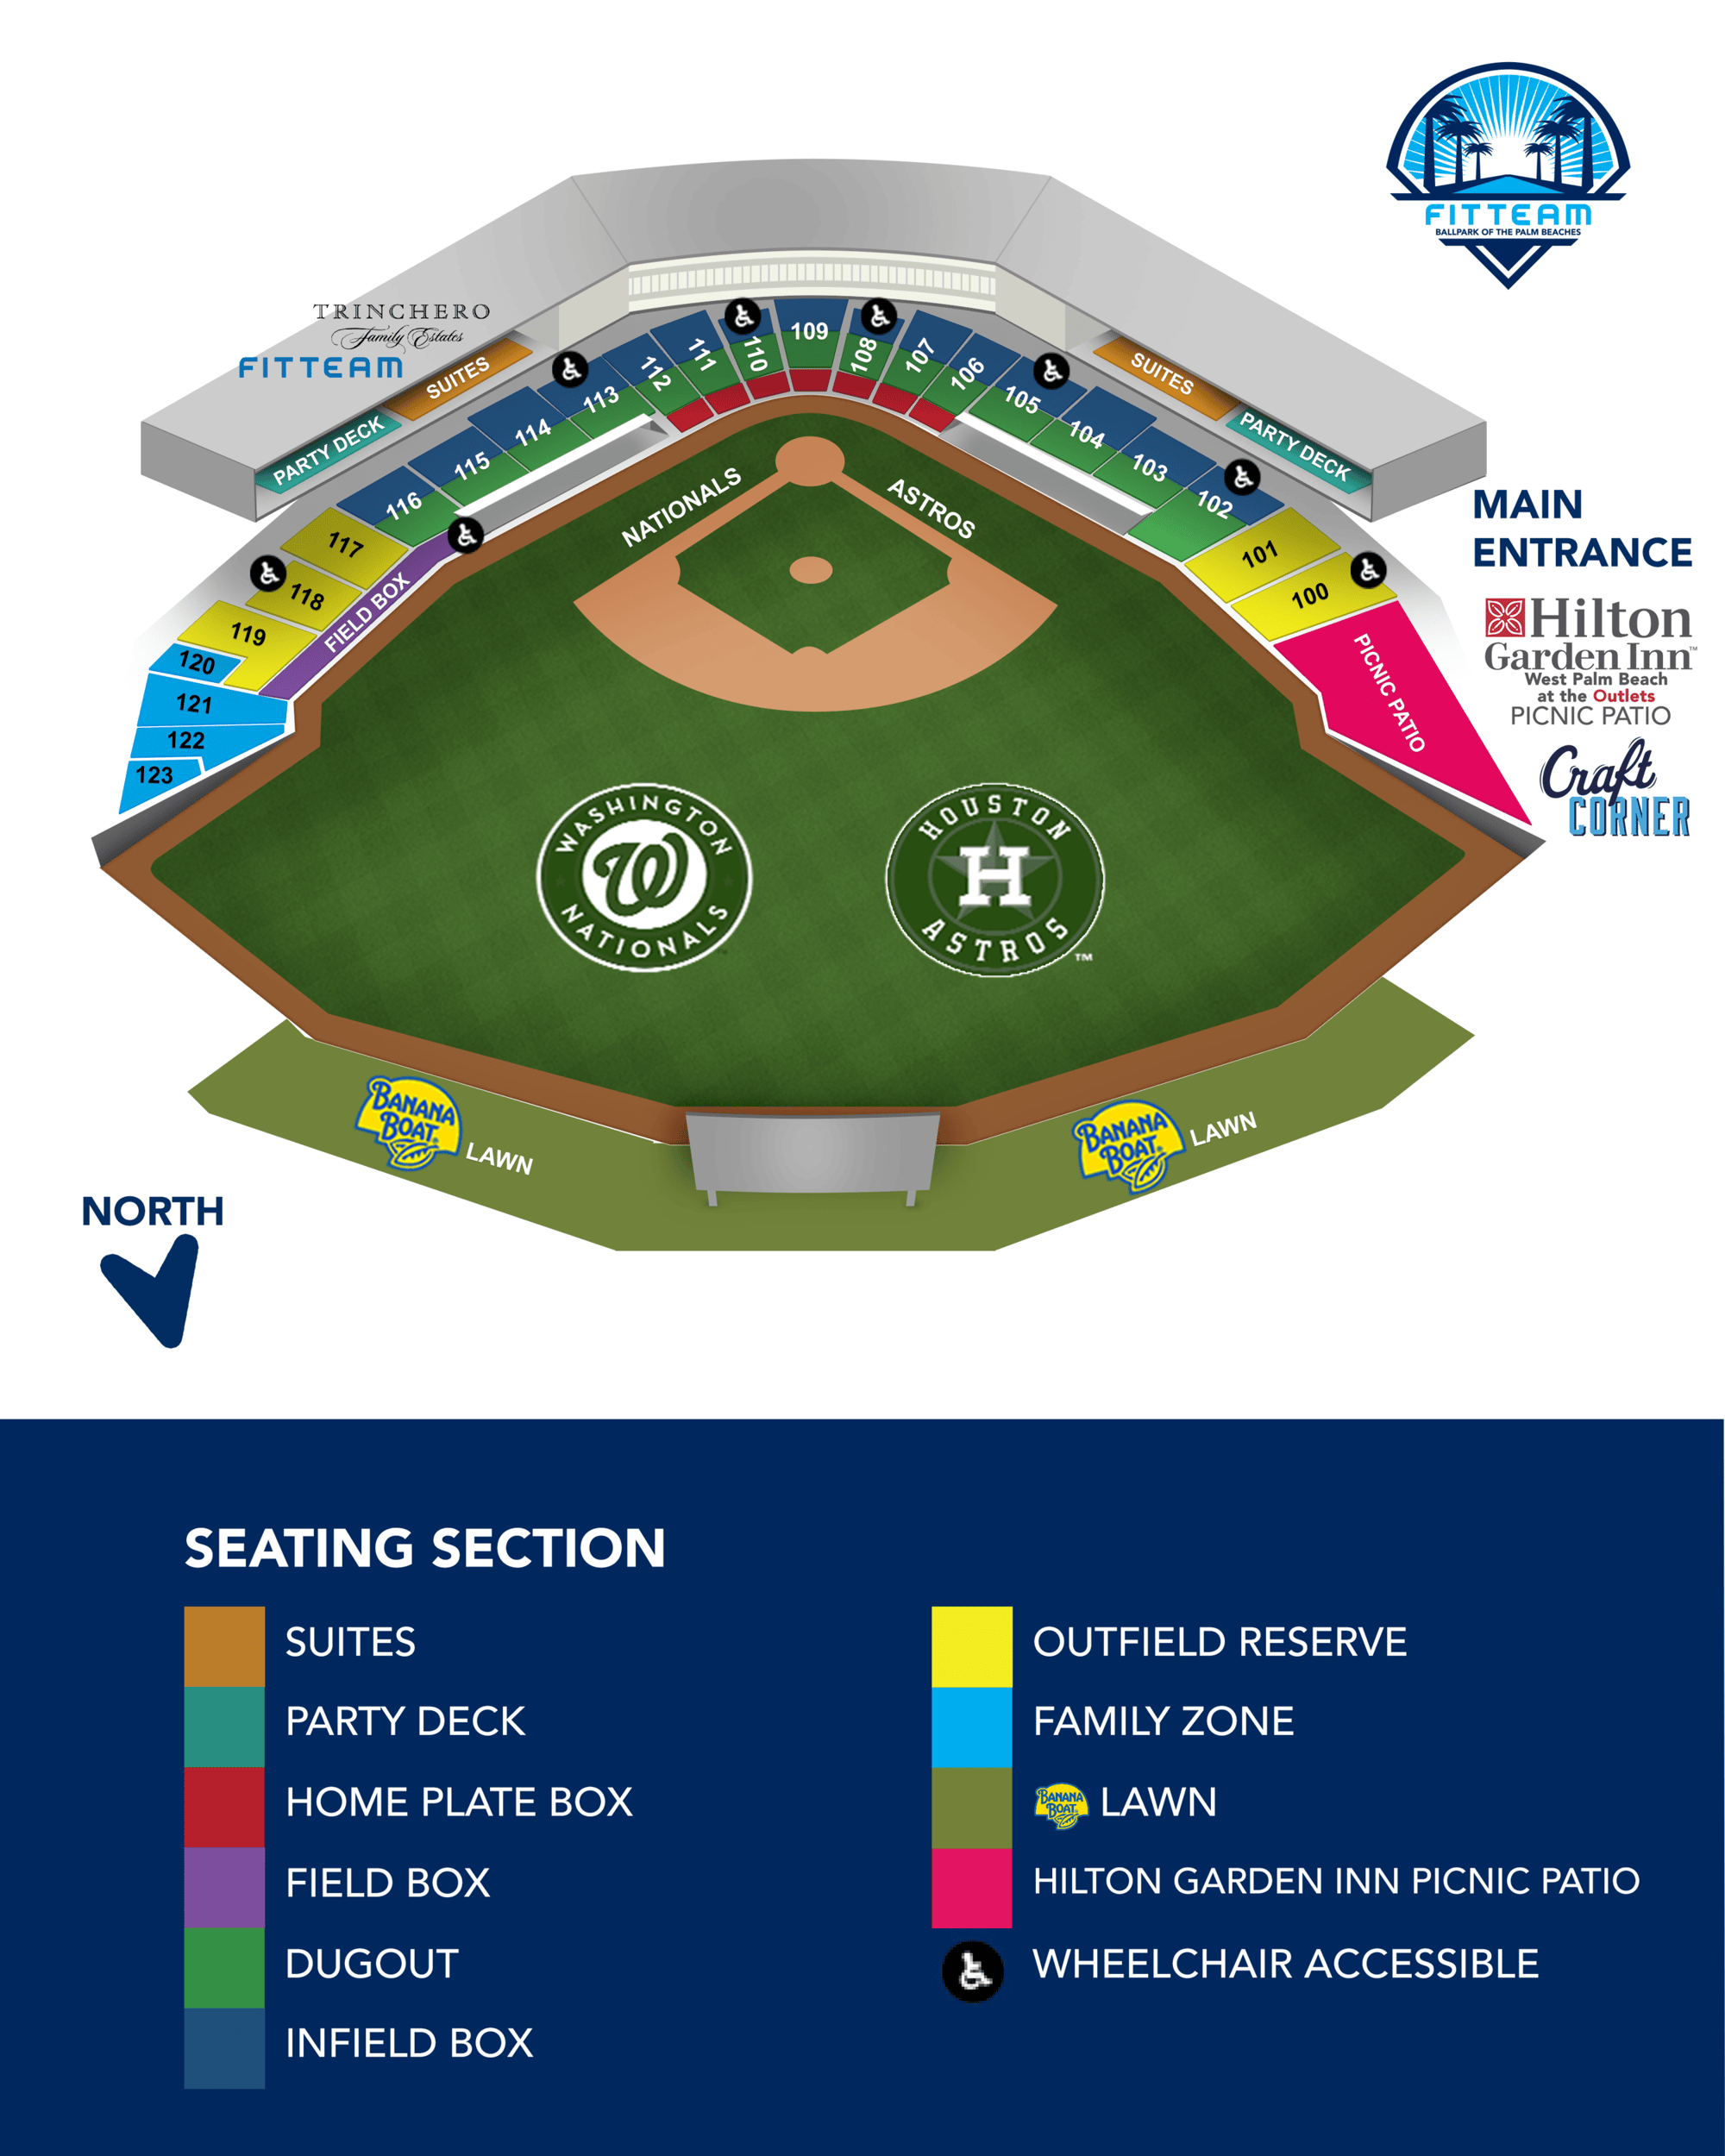 How To Find The Cheapest Washington Nationals Spring Training Tickets